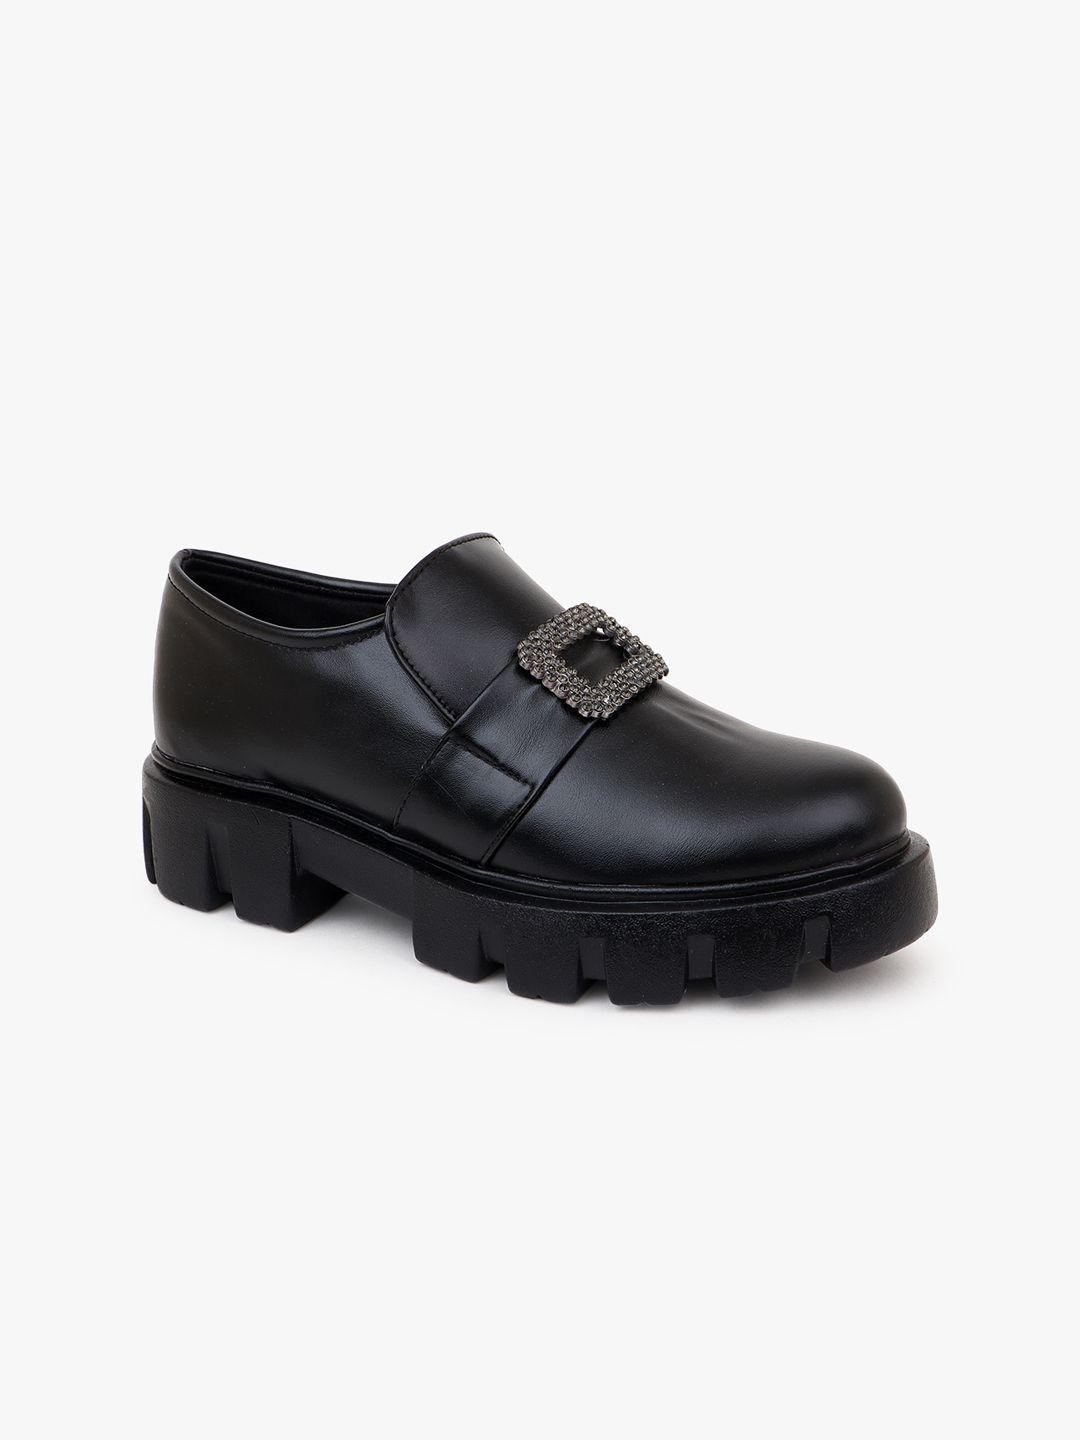 the roadster lifestyle co. women black buckled heeled loafers